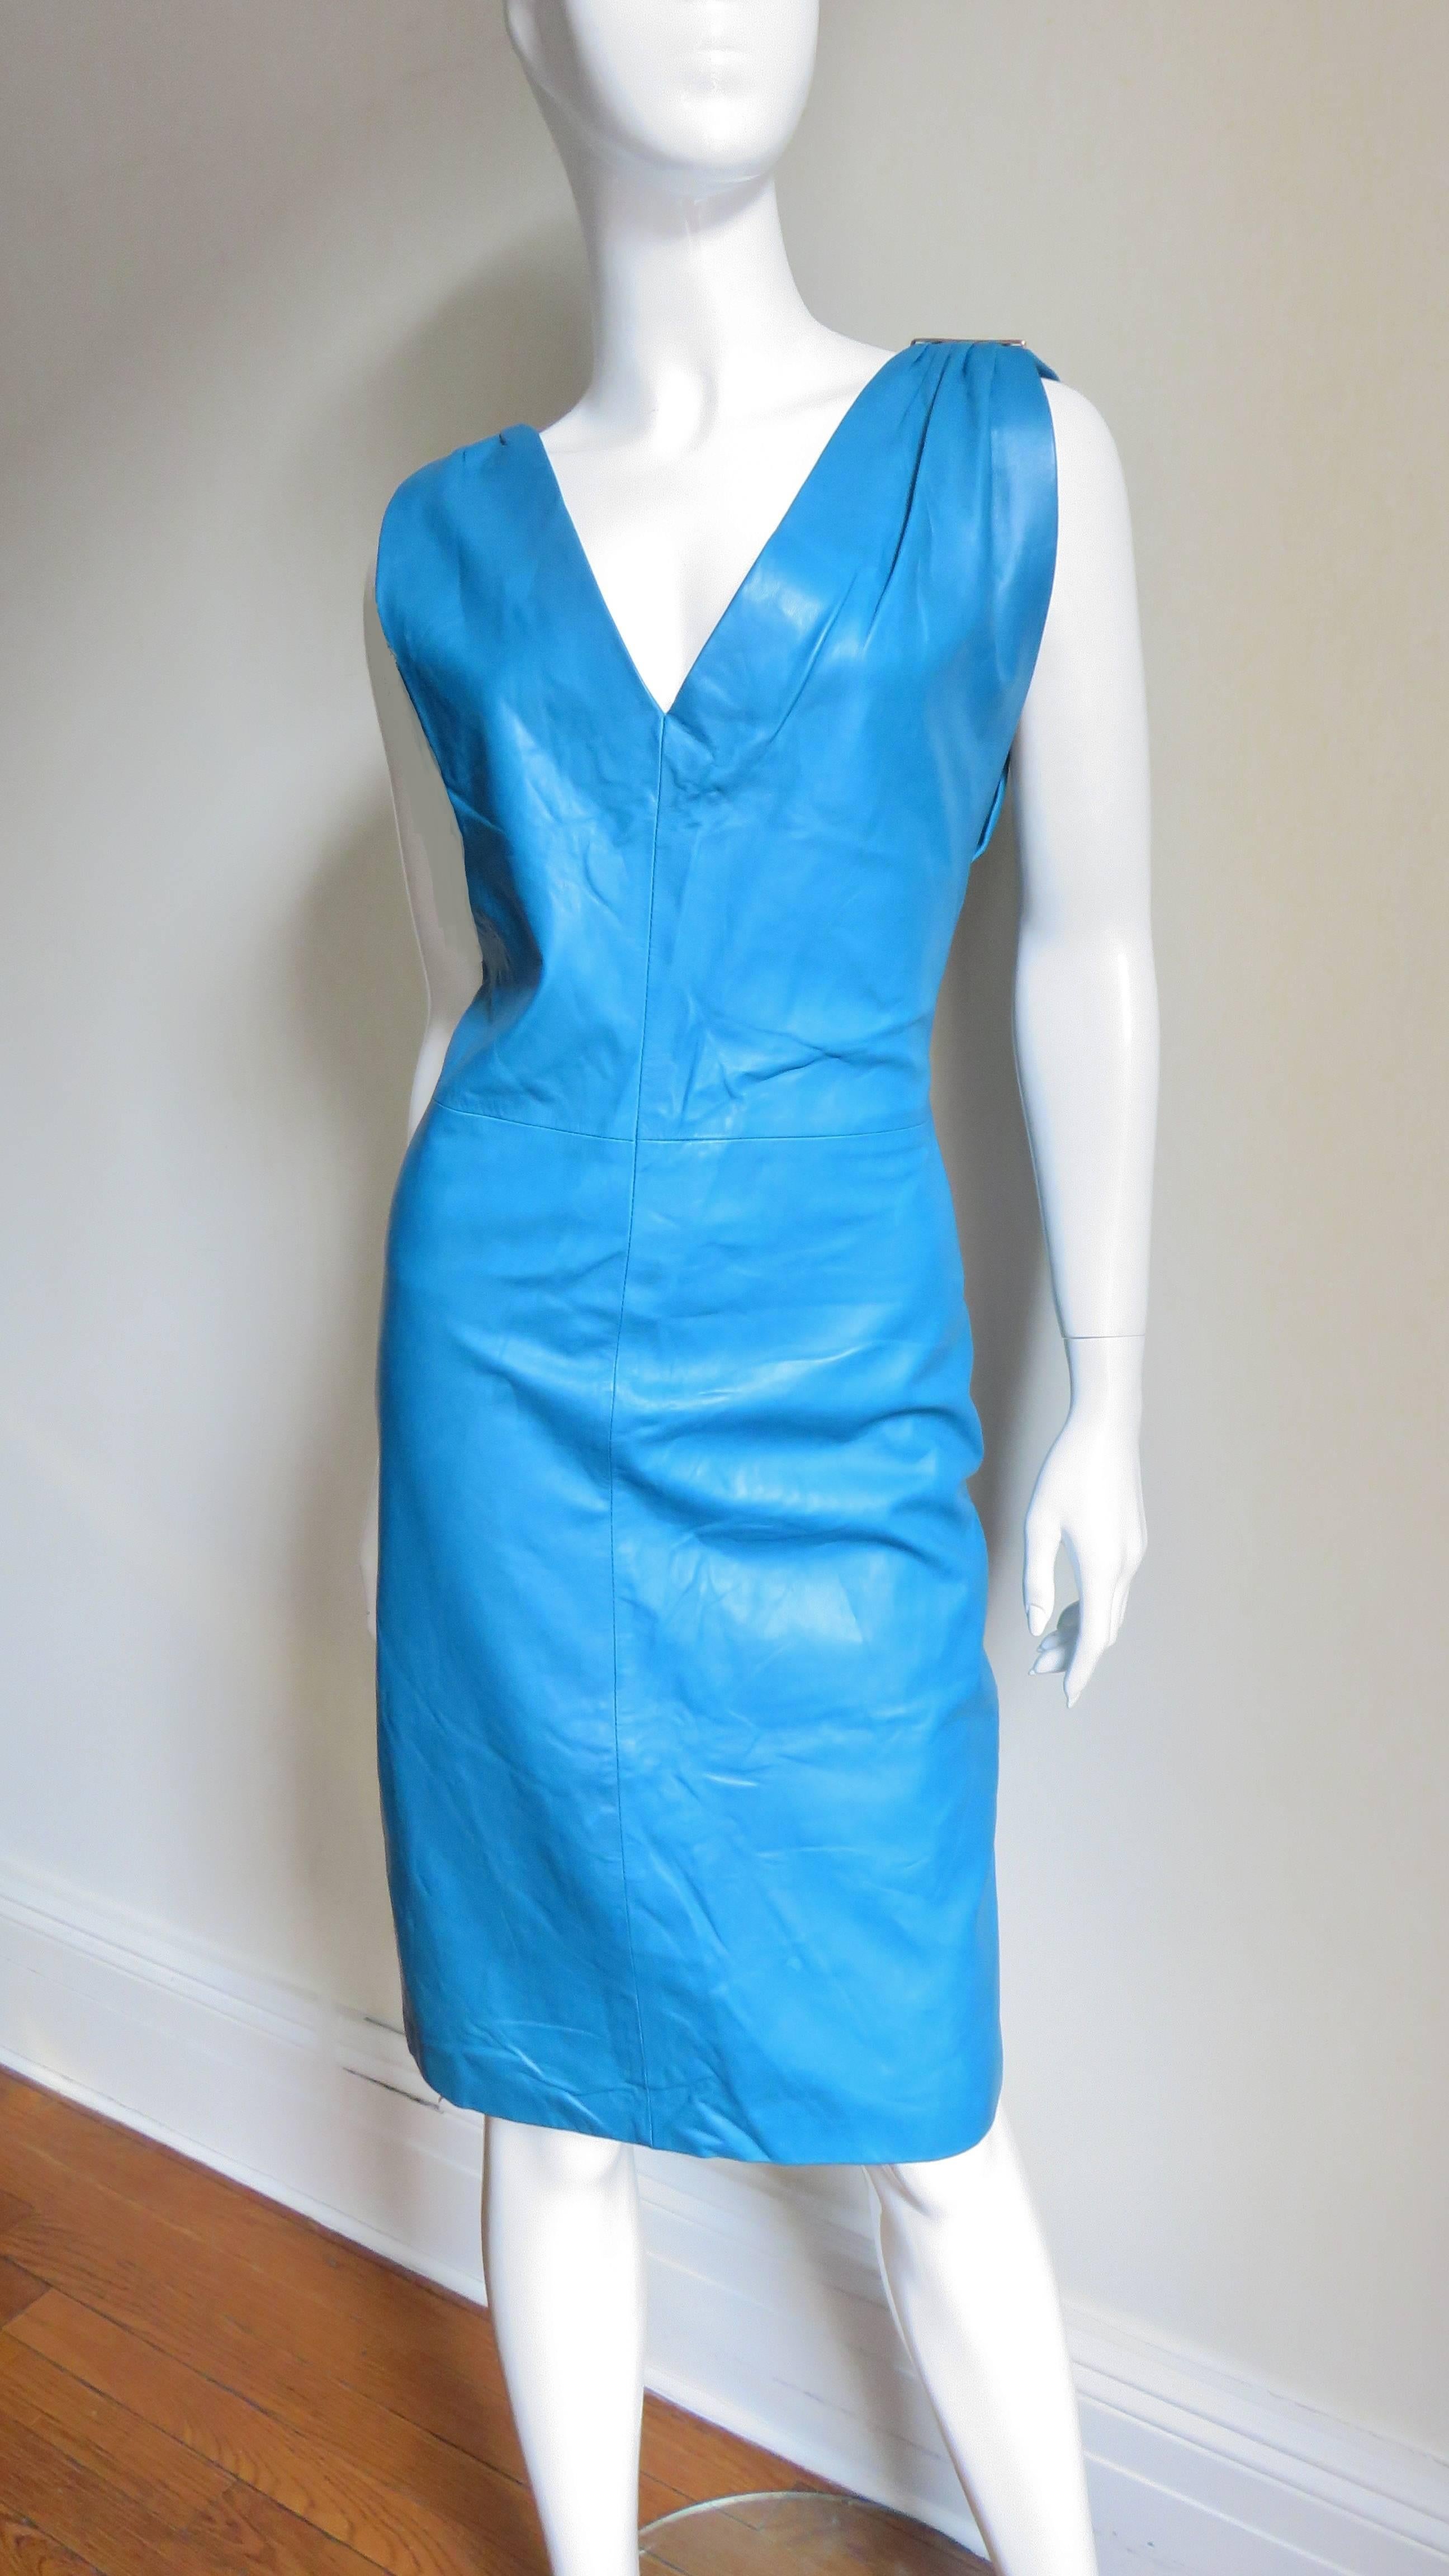  Gianni Versace New Turquoise Leather Dress 1990s For Sale 1